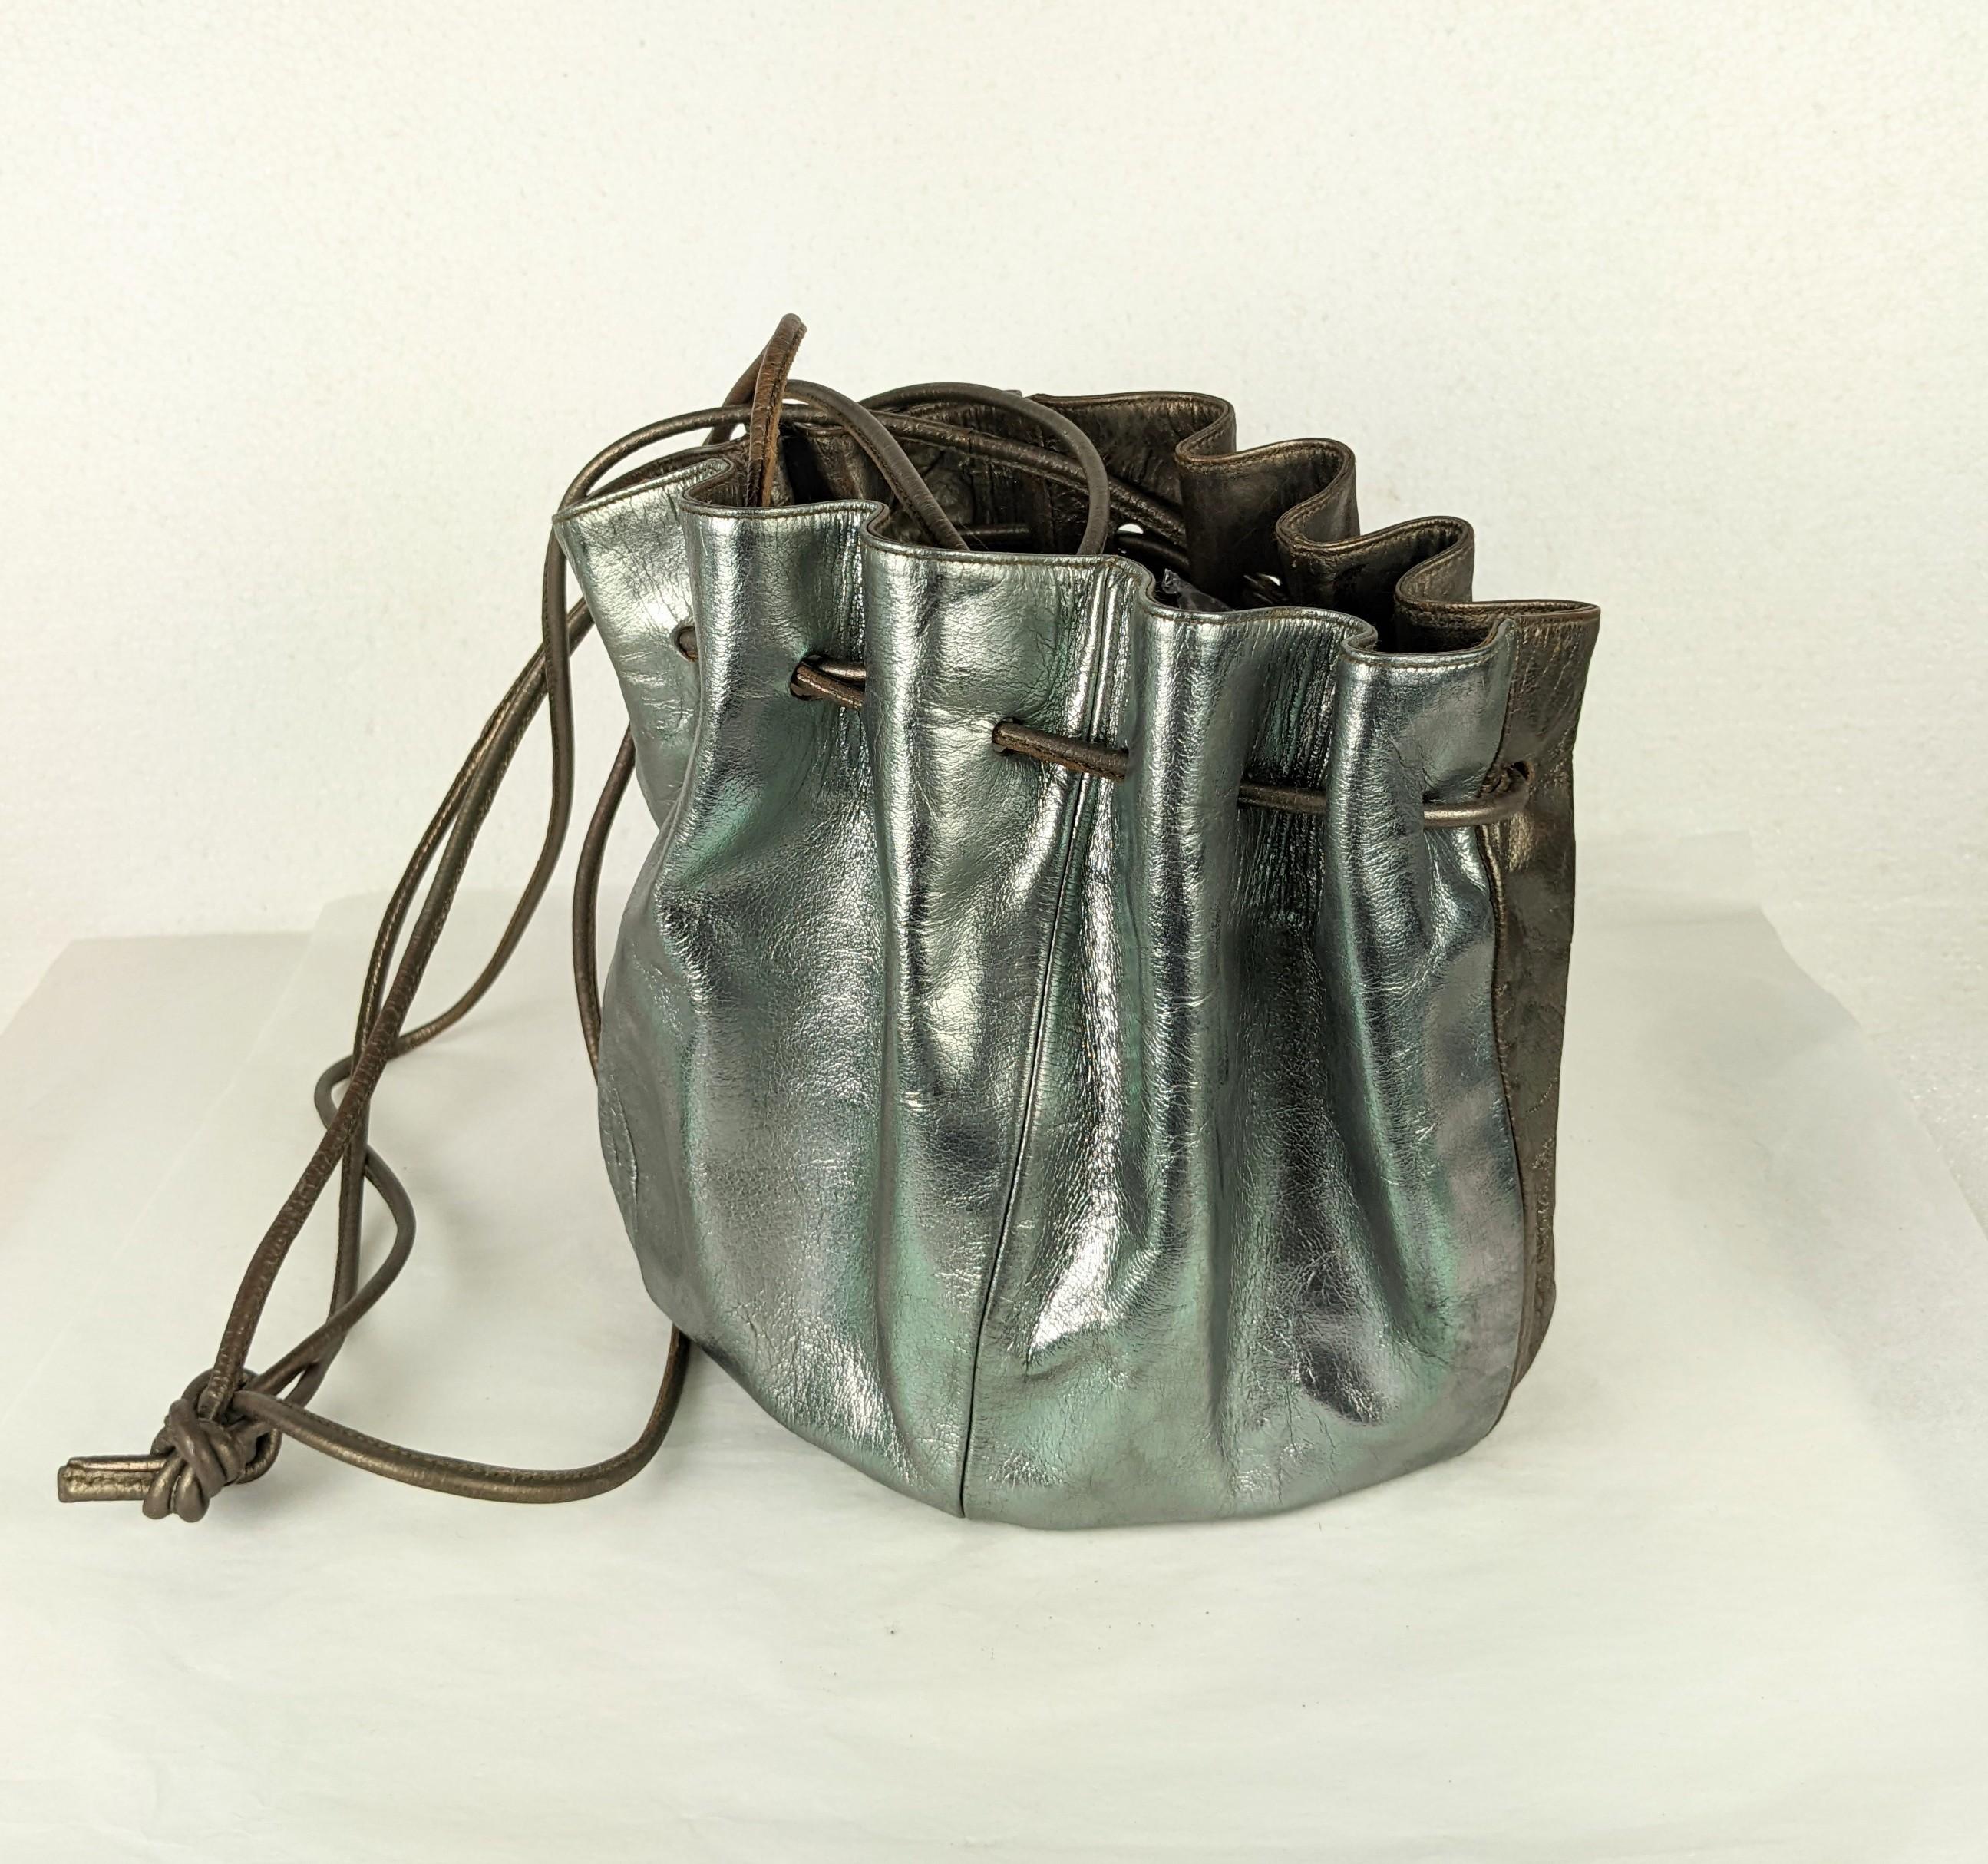 Maud Frizon 2 Tone Metallic Leather Drawstring Bag In Good Condition For Sale In New York, NY